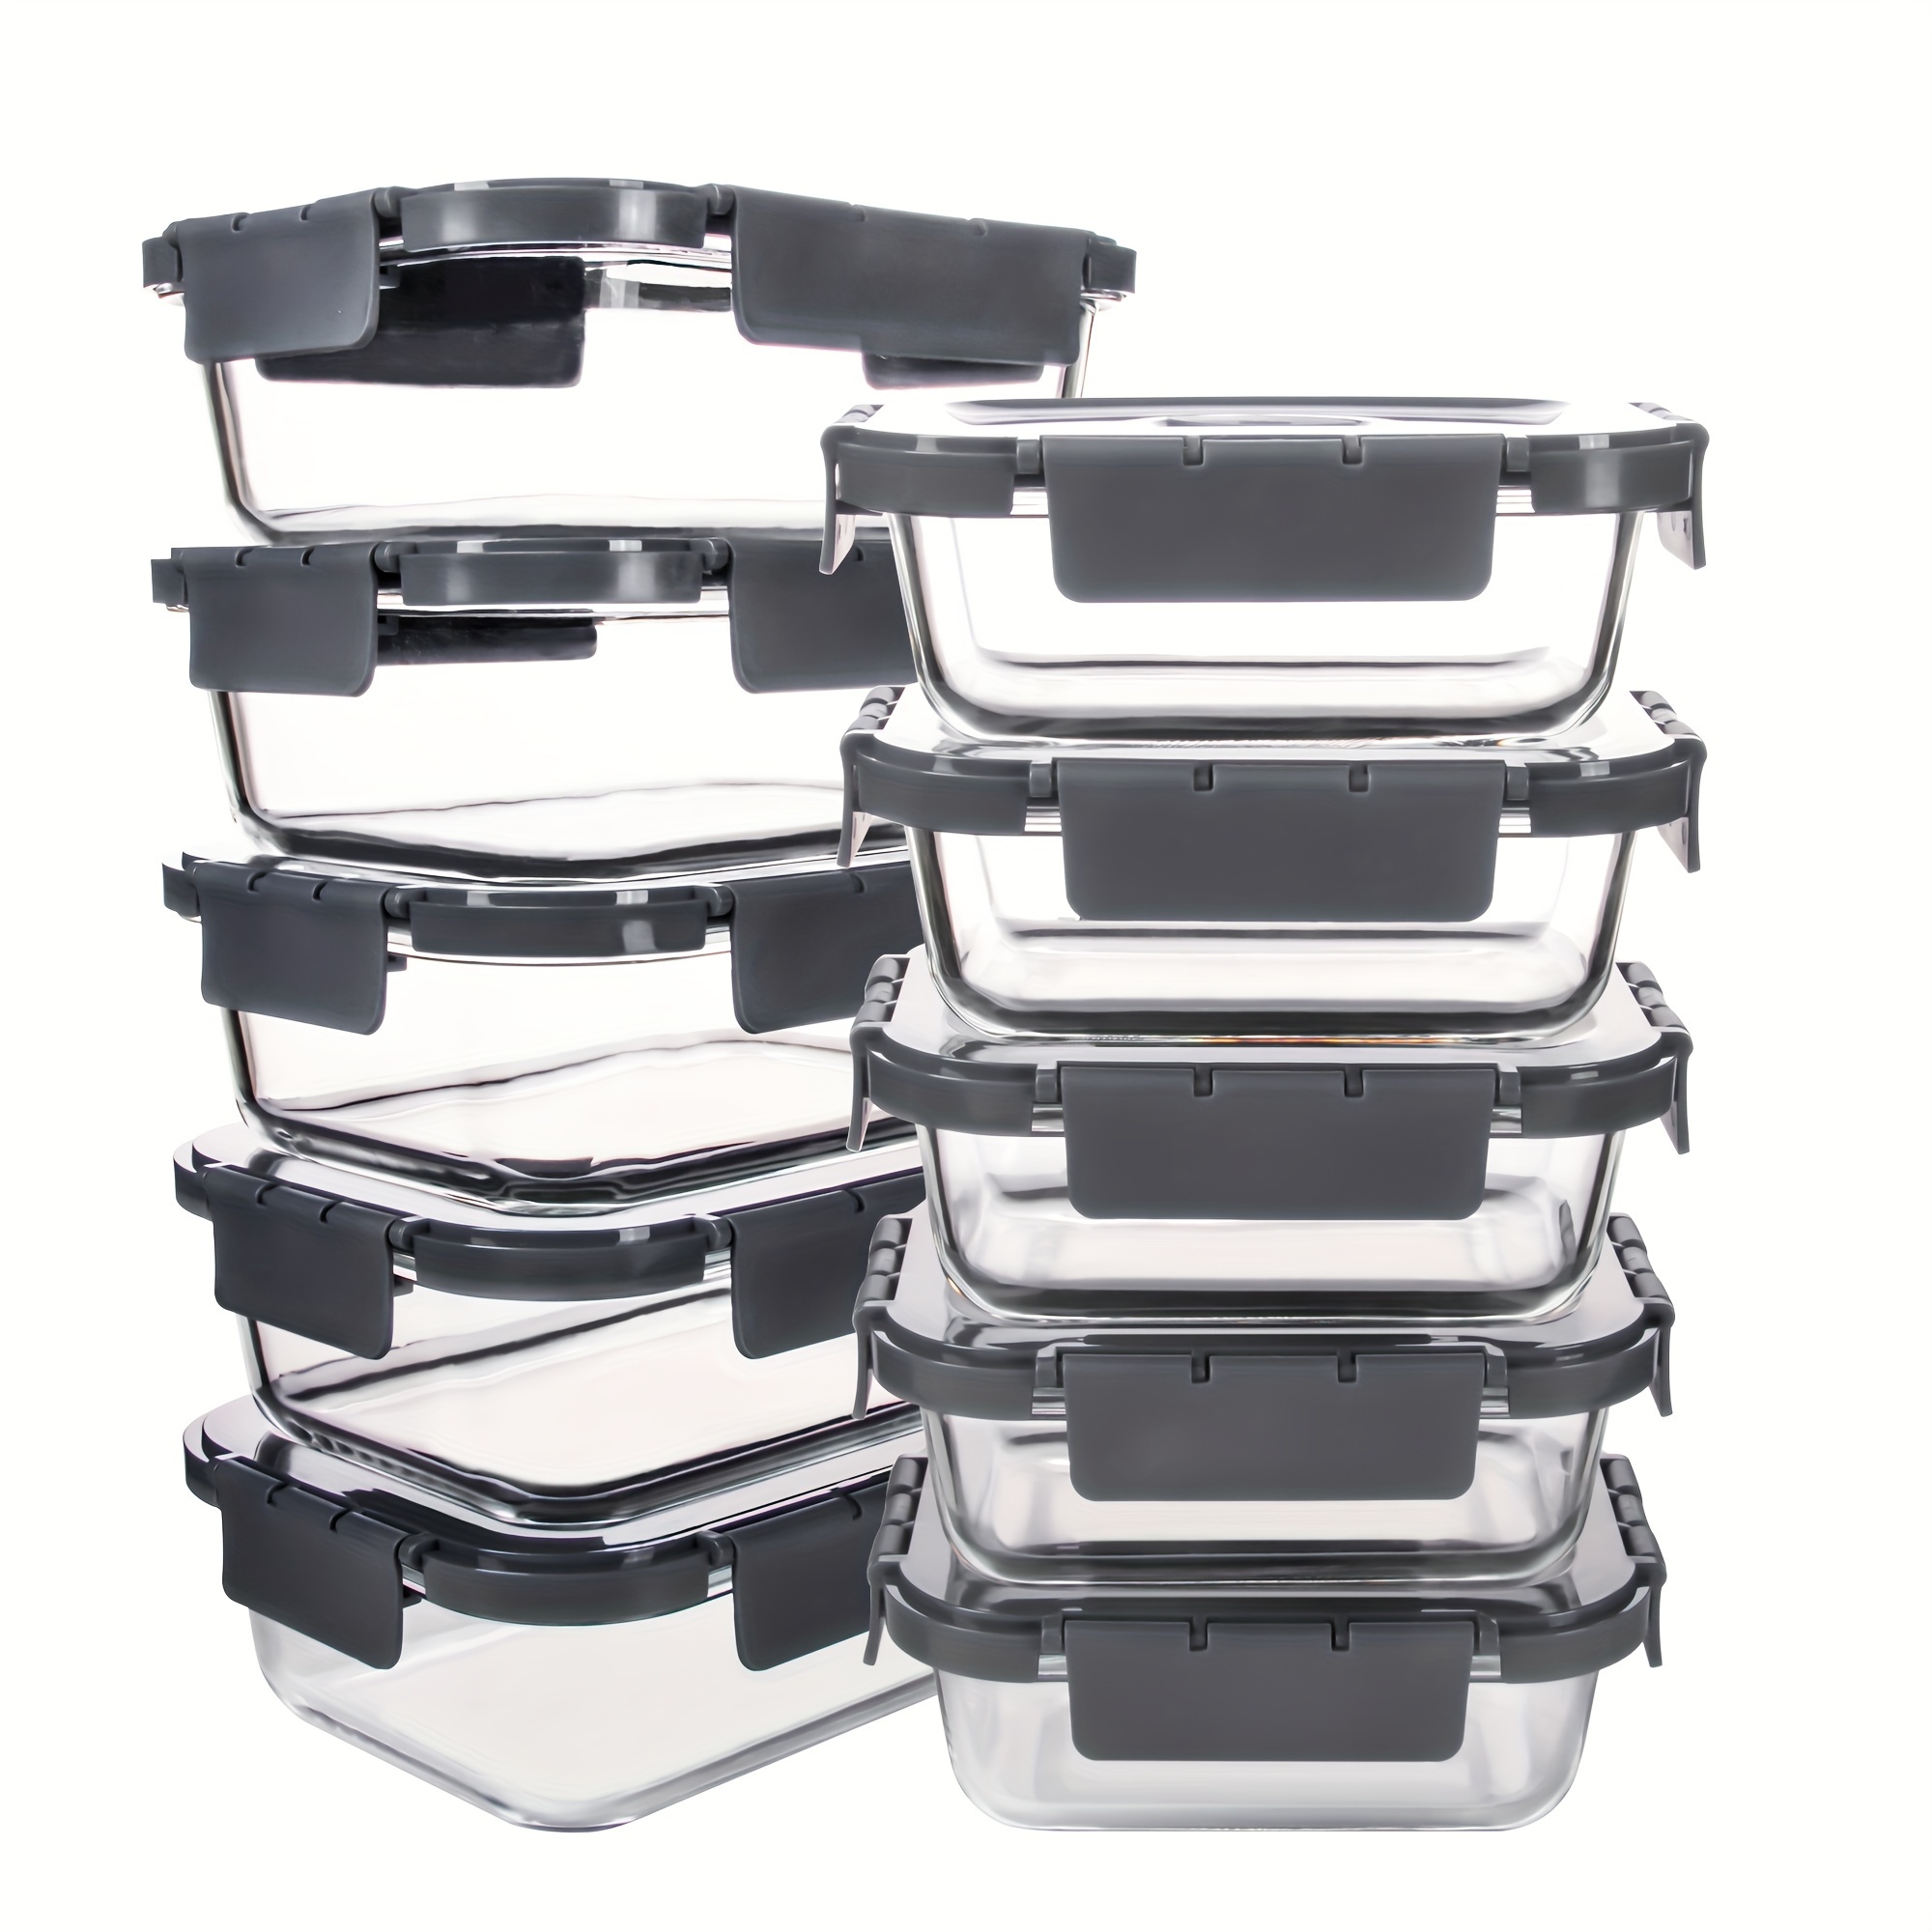 

10 Pack Glass Food Storage Containers, Glass Meal Prep Containers With Snap Locking Lids Airtight Built In Air Vents, Glass Lunch Containers, Microwave/dishwasher Safe